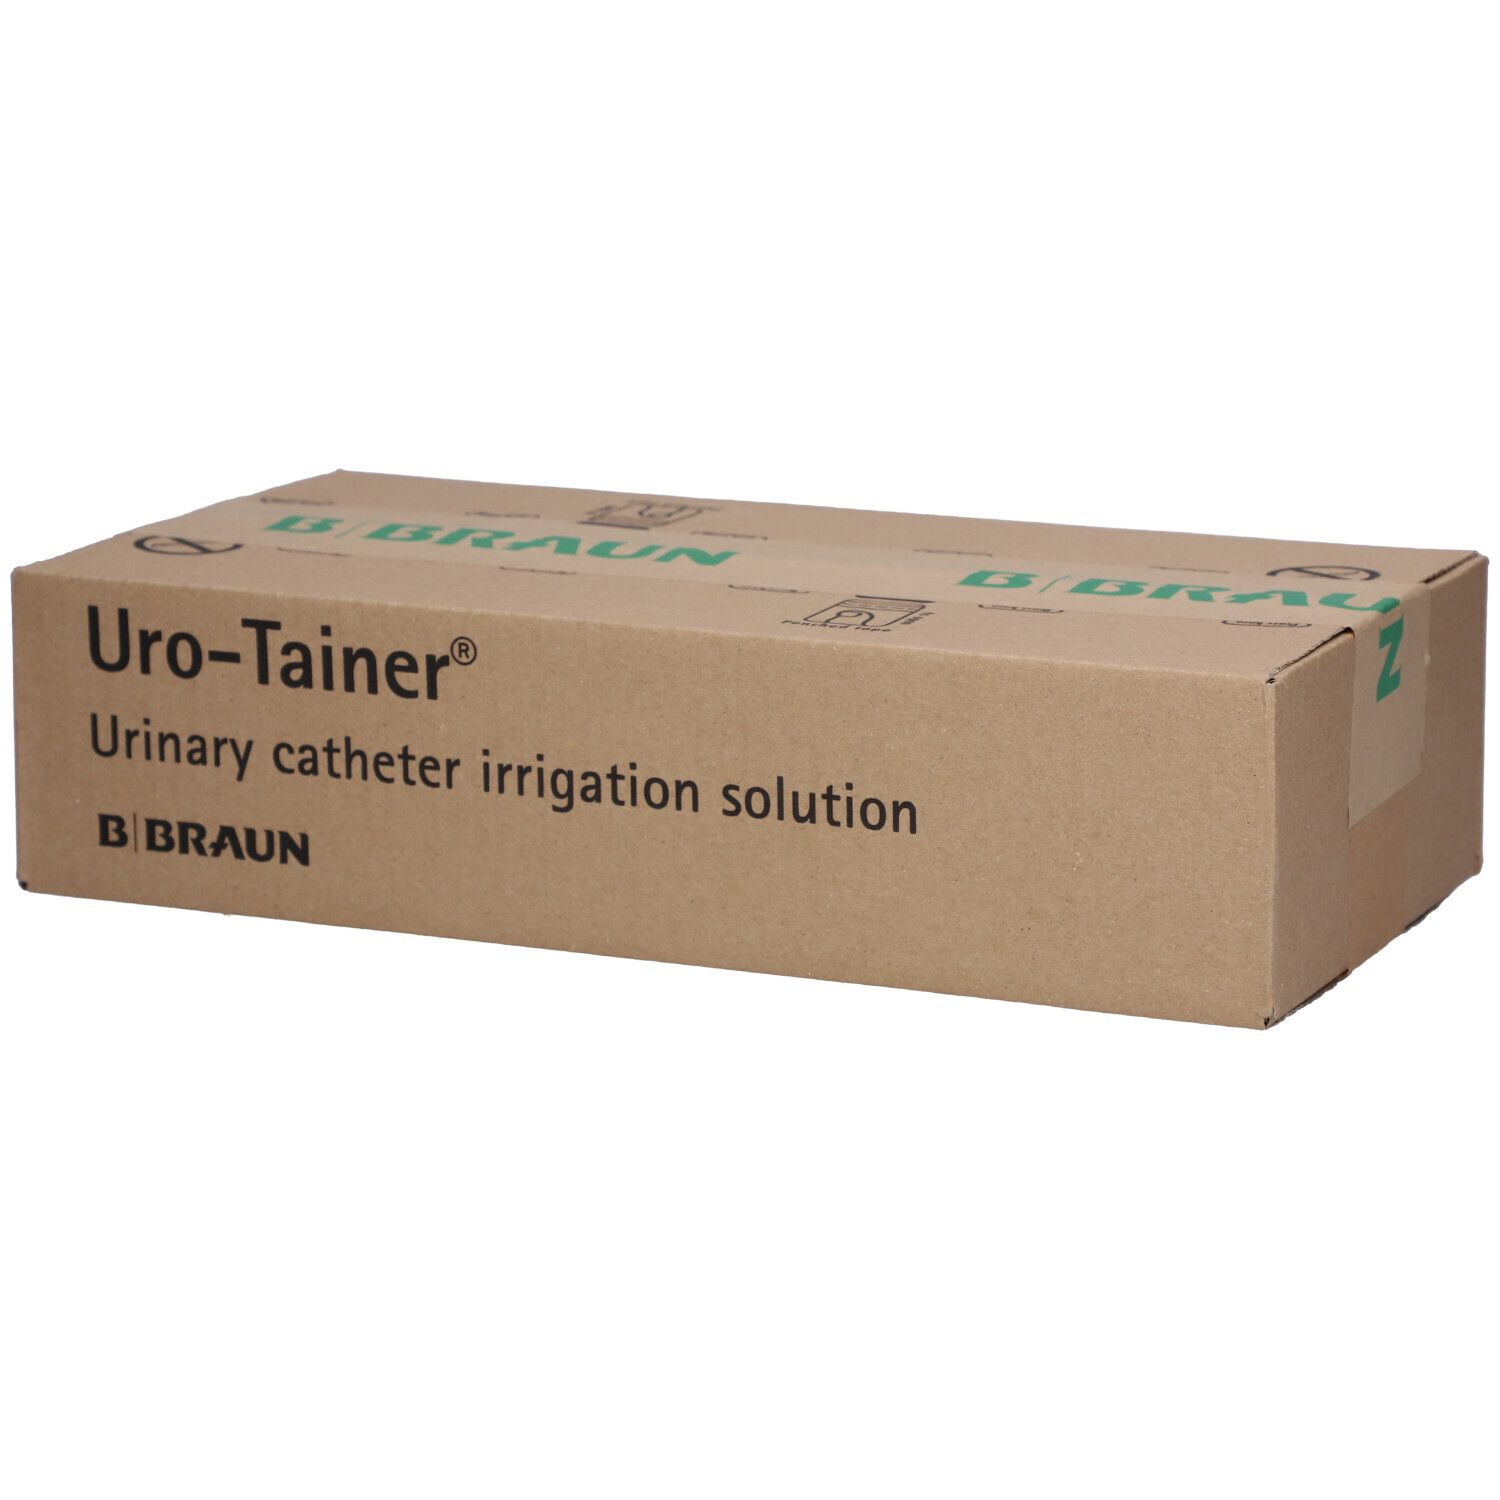 Uro-Tainer® NaCl